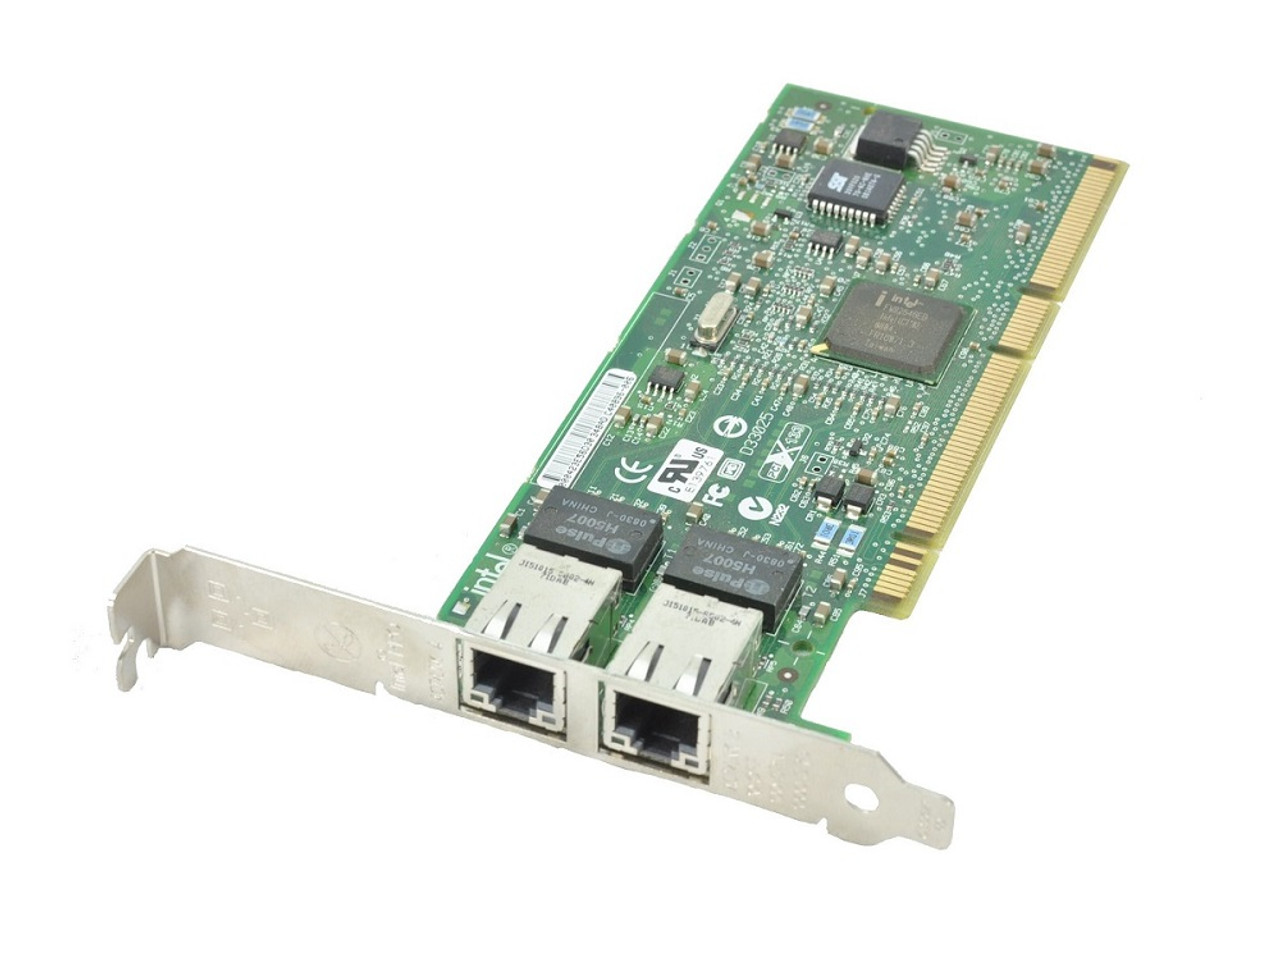 A7100965 - Dell Connect-ib Infiniband Host Bus Adapter, 1 X PCI-Express 3.0 X8,56 Gbit/s,1 X Total Infiniband Port(s),plug-in Card